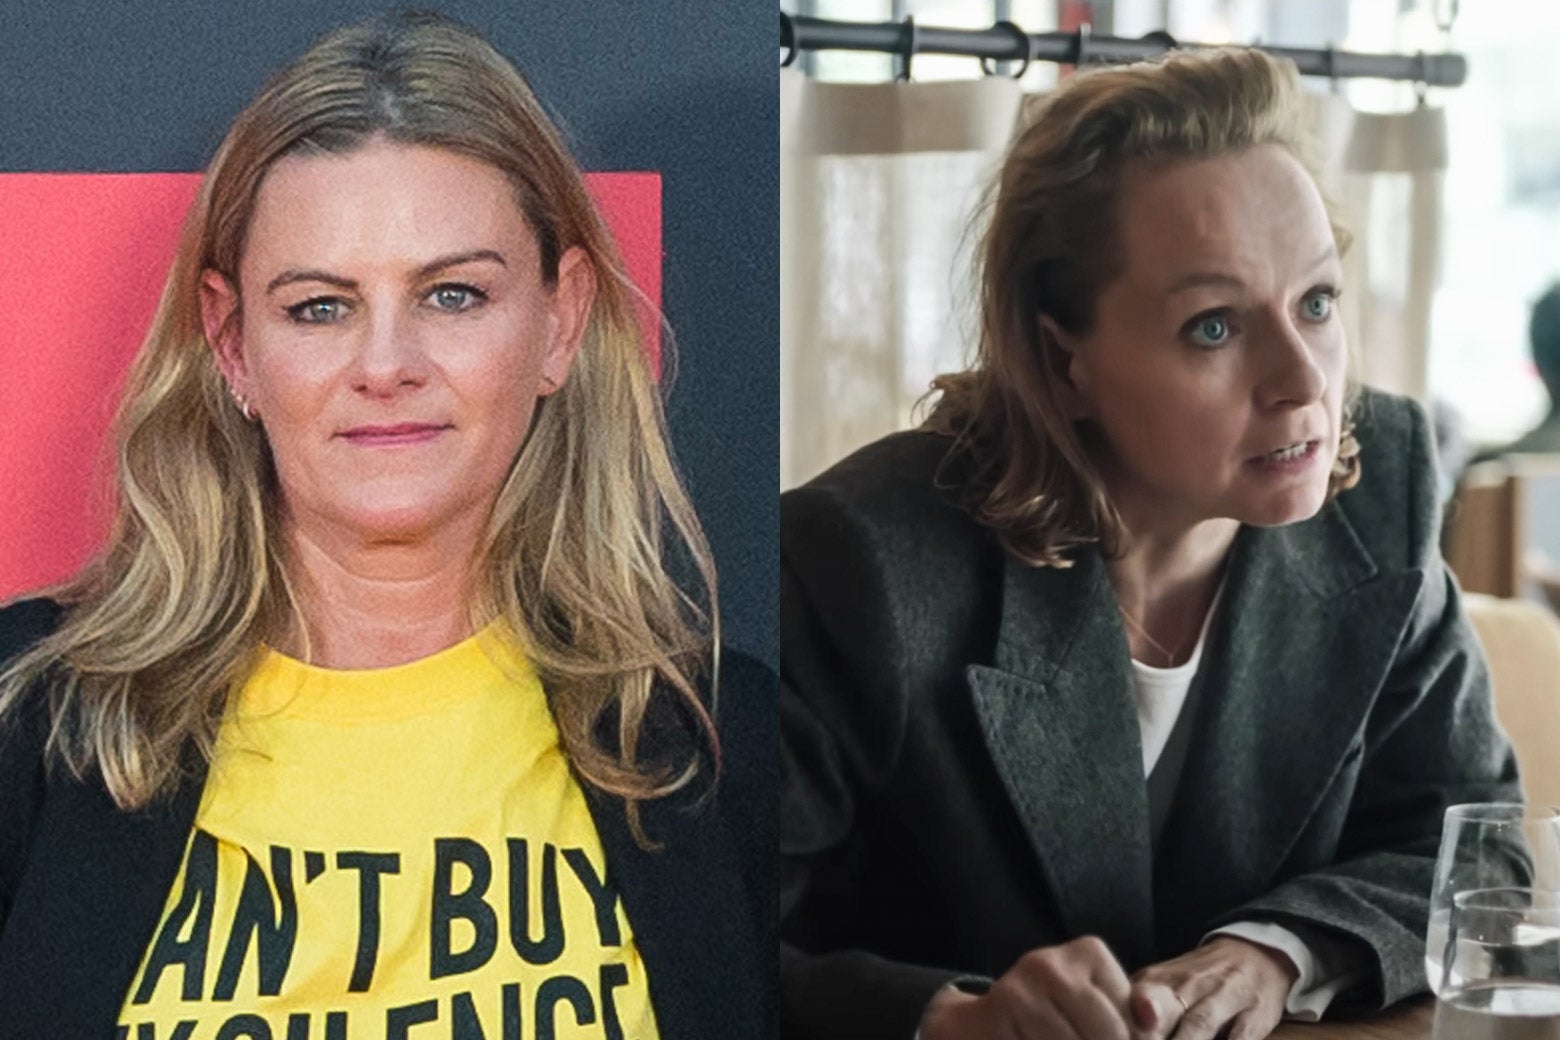 The women look remarkably similar. On the left, a blonde in a black blazer with a t-shirt underneath stands on what appears to be a red carpet. On the right, Morton, in a gray blazer with a simple white shirt underneath, leans across a cafe table, an intense look in her eyes.